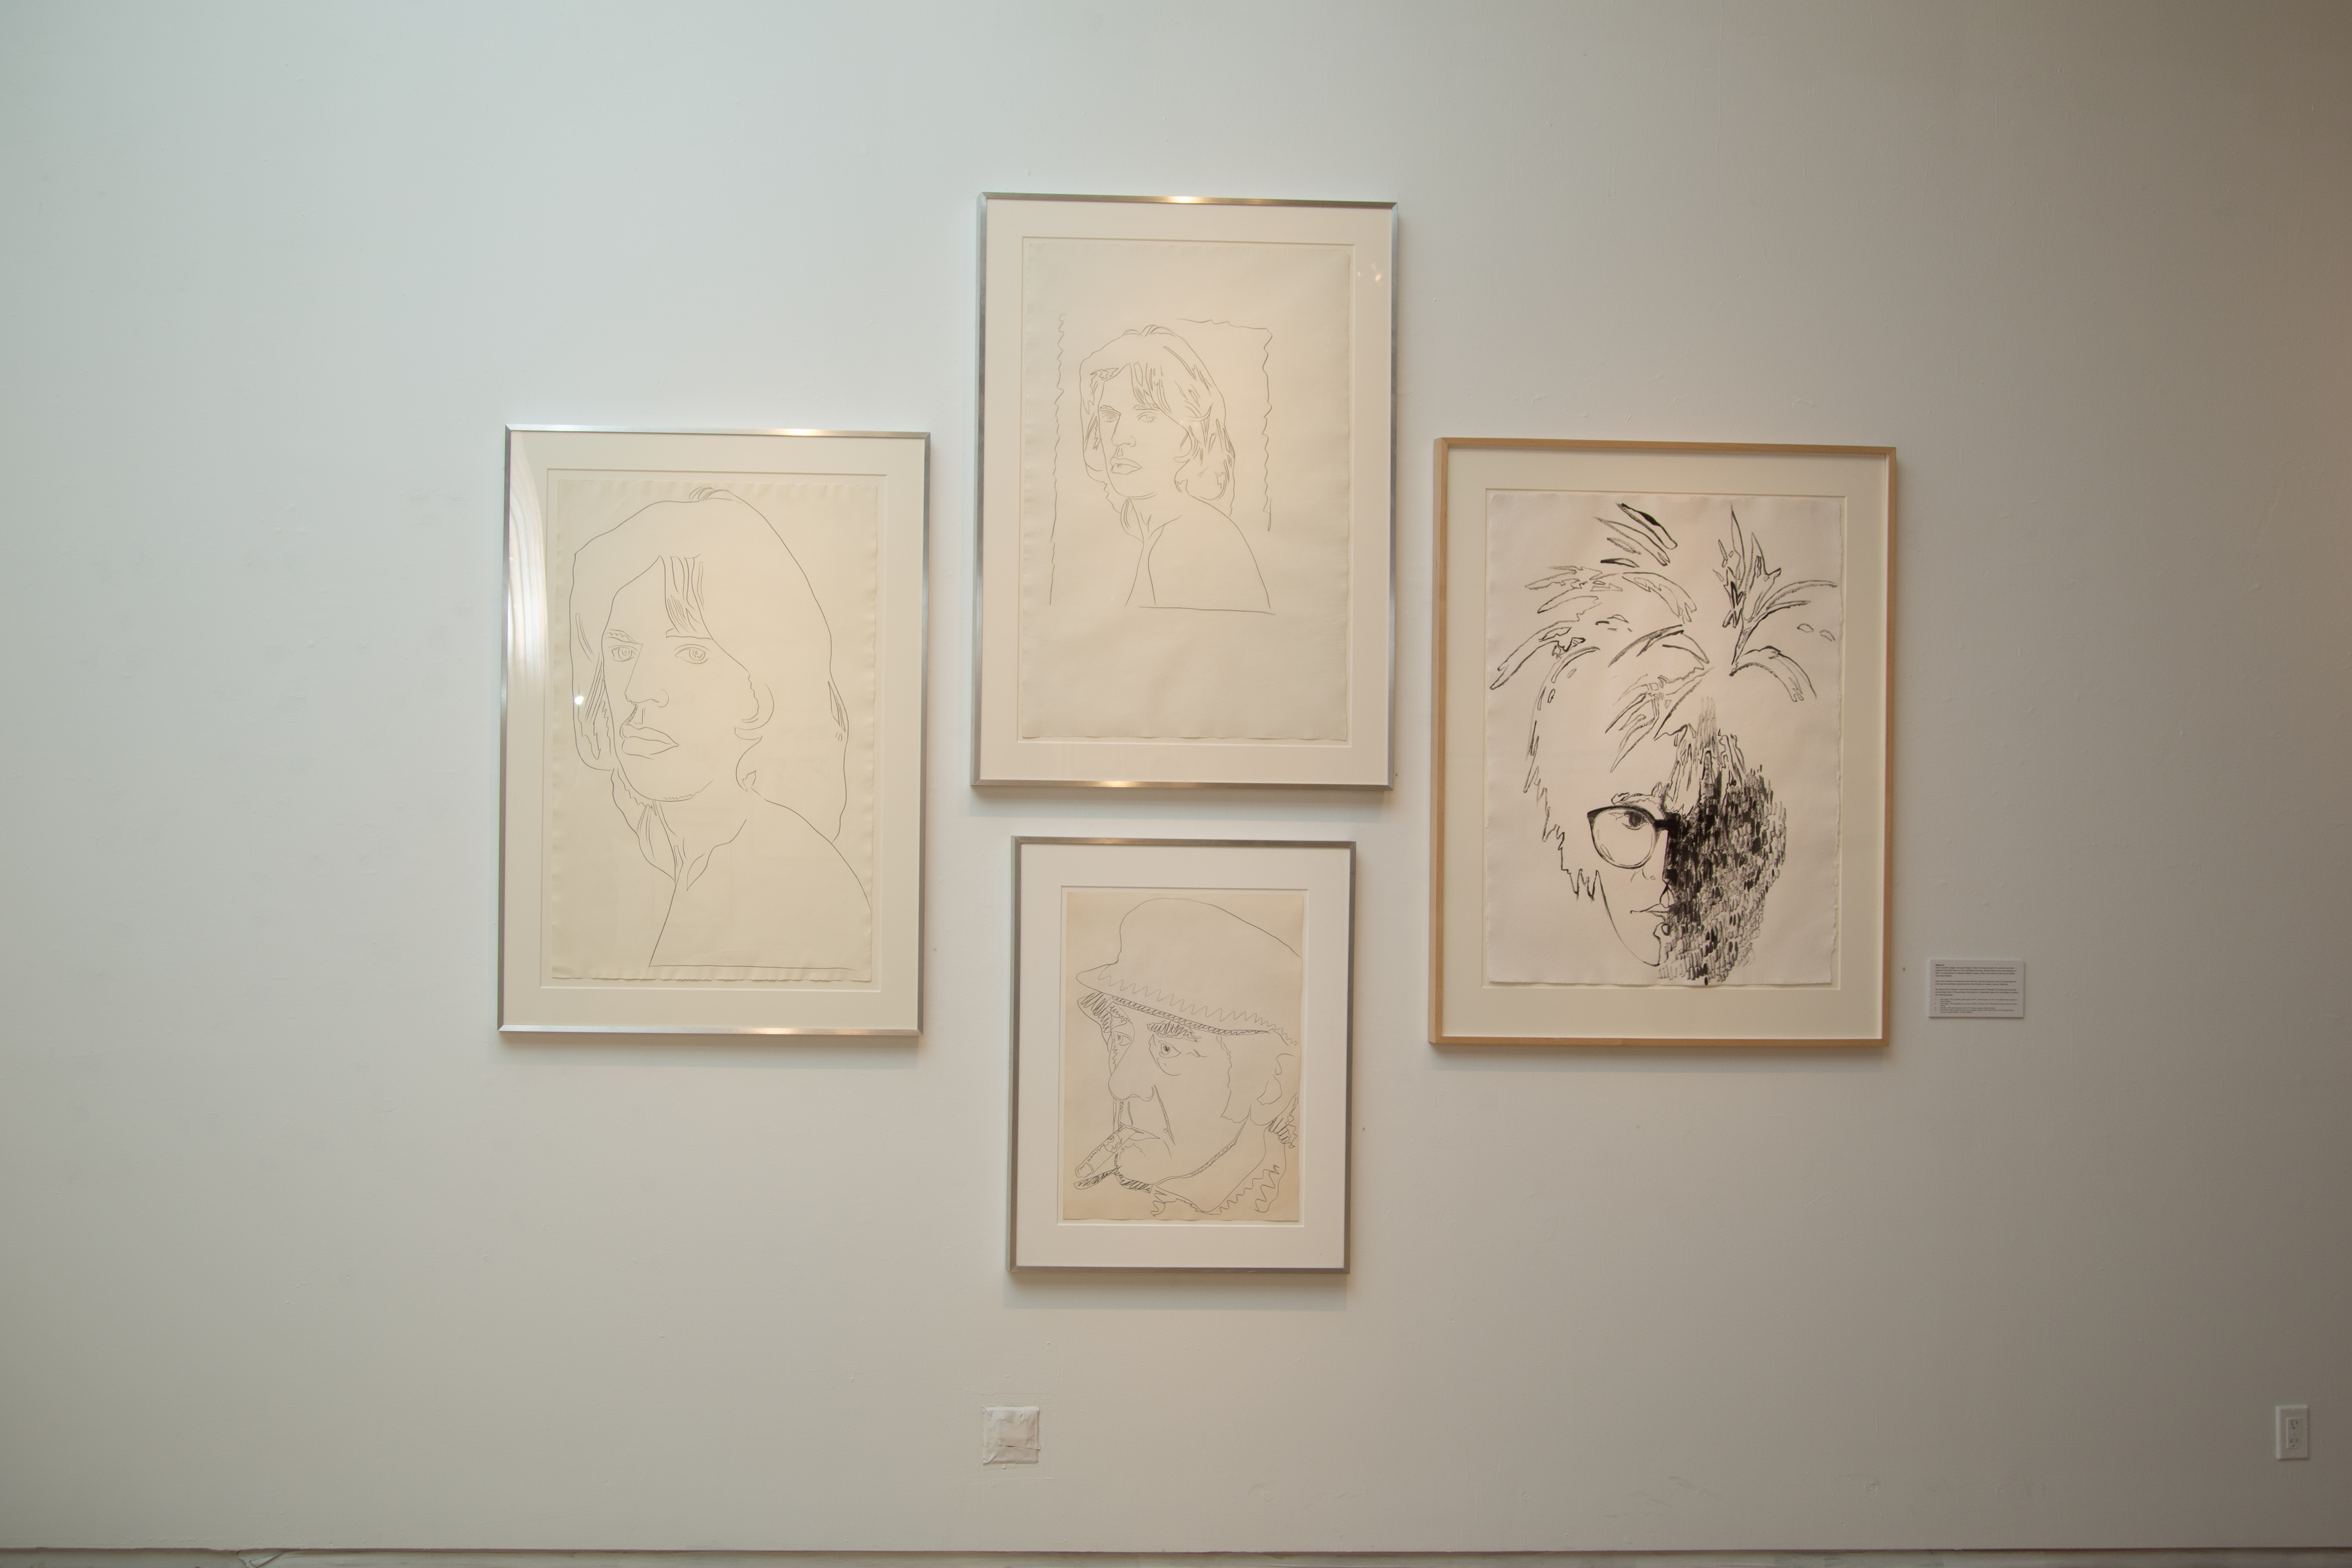  Rare Andy Warhol Drawings to Be Spotlighted in NYC Exhibition 